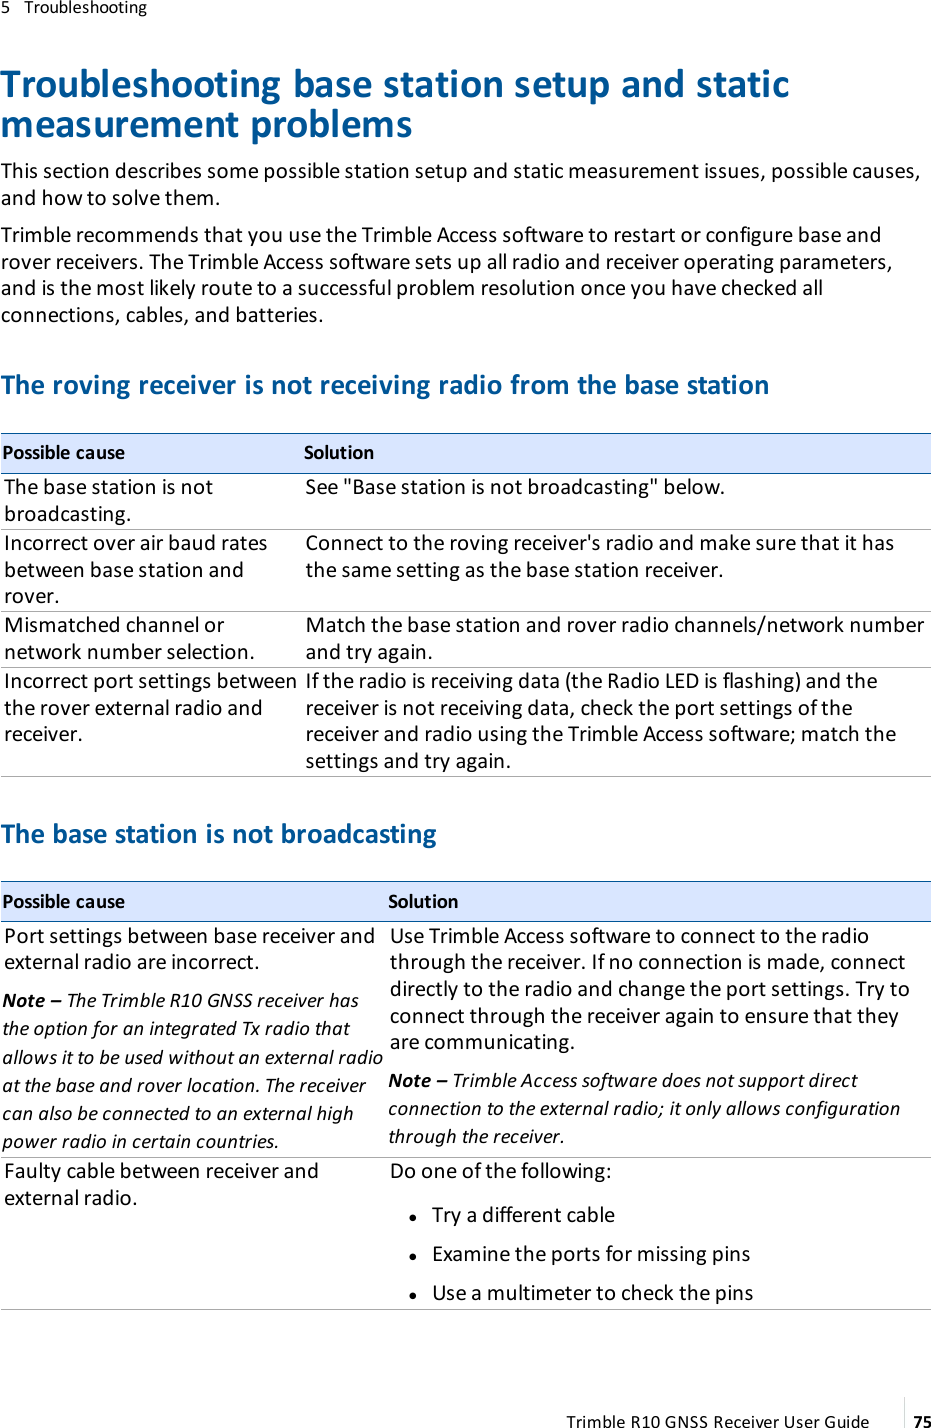 5   TroubleshootingTroubleshooting base station setup and static measurement problemsThis section describes some possible station setup and static measurement issues, possible causes, and how to solve them.Trimble recommends that you use the Trimble Access software to restart or configure base and rover receivers. The Trimble Access software sets up all radio and receiver operating parameters, and is the most likely route to a successful problem resolution once you have checked all connections, cables, and batteries.The roving receiver is not receiving radio from the base station          Possible cause SolutionThe base station is not broadcasting.See &quot;Base station is not broadcasting&quot; below. Incorrect over air baud rates between base station and rover.Connect to the roving receiver&apos;s radio and make sure that it has the same setting as the base station receiver.Mismatched channel or network number selection.Match the base station and rover radio channels/network number and try again.Incorrect port settings between the rover external radio and receiver.If the radio is receiving data (the Radio LED is flashing) and the receiver is not receiving data, check the port settings of the receiver and radio using the Trimble Access software; match the settings and try again.The base station is not broadcasting            Possible cause SolutionPort settings between base receiver and external radio are incorrect.  Note – The Trimble R10 GNSS receiver has the option for an integrated Tx radio that allows it to be used without an external radio at the base and rover location. The receiver can also be connected to an external high power radio in certain countries.Use Trimble Access software to connect to the radio through the receiver. If no connection is made, connect directly to the radio and change the port settings. Try to connect through the receiver again to ensure that they are communicating. Note – Trimble Access software does not support direct connection to the external radio; it only allows configuration through the receiver.  Faulty cable between receiver and external radio. Do one of the following: lTry a different cable lExamine the ports for missing pins lUse a multimeter to check the pinsTrimble R10 GNSS Receiver User Guide 75